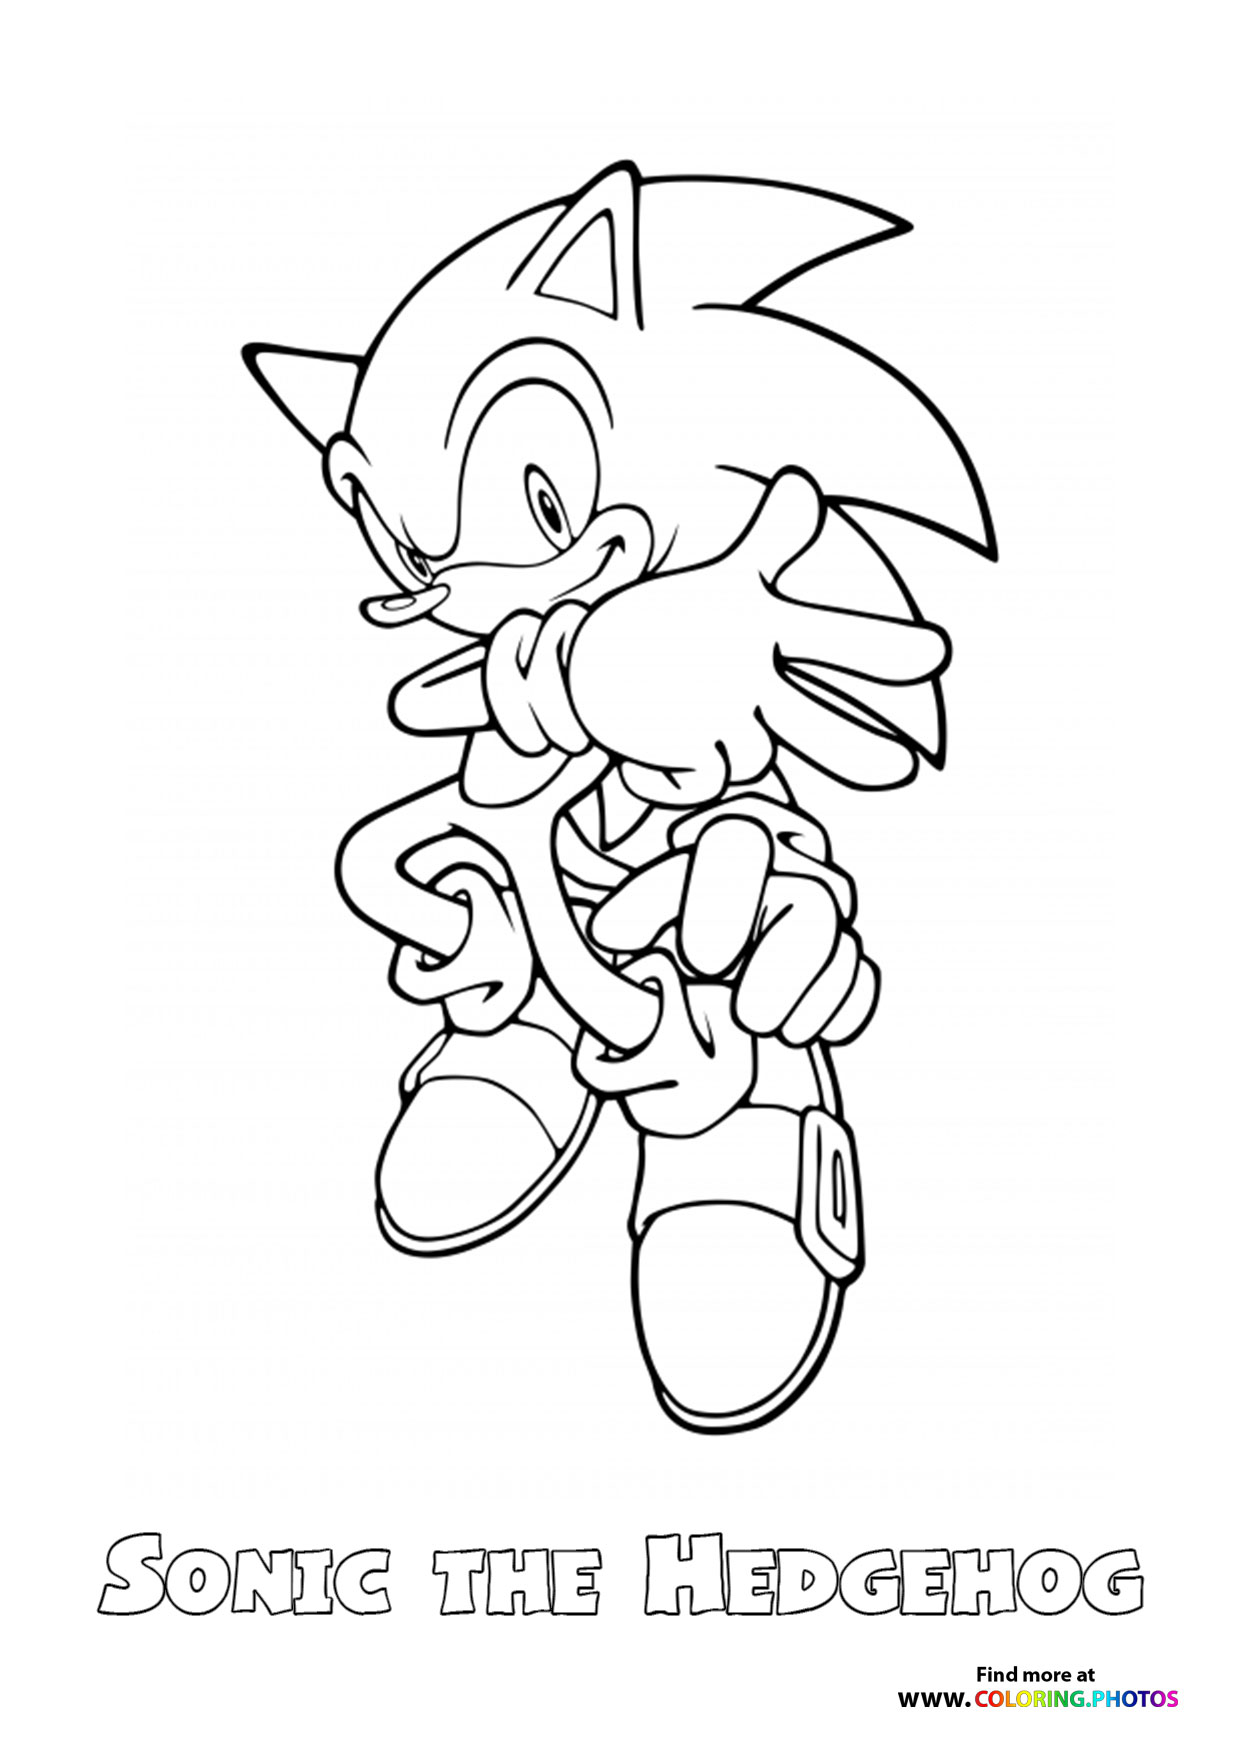 Sonic the Hedgehog - Coloring Pages for kids